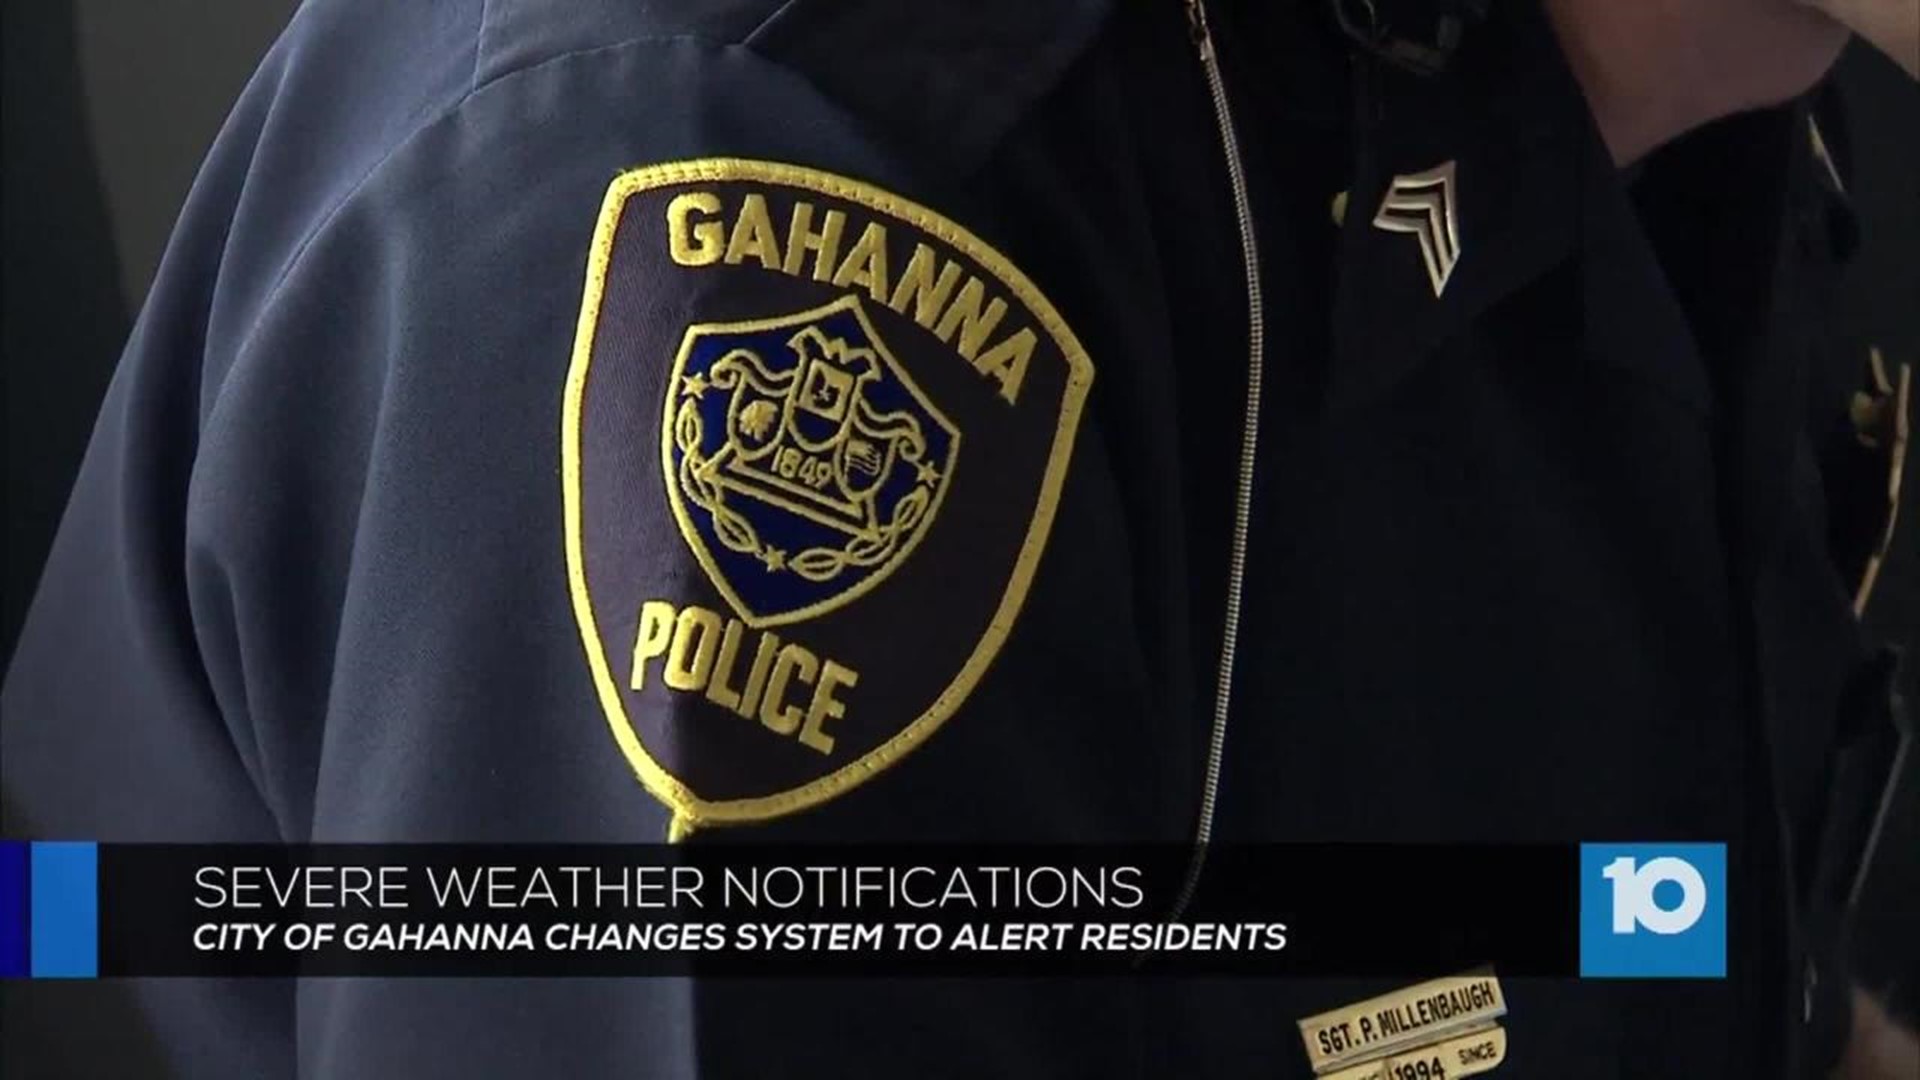 Have you signed up for emergency alerts? You may need to sign up again